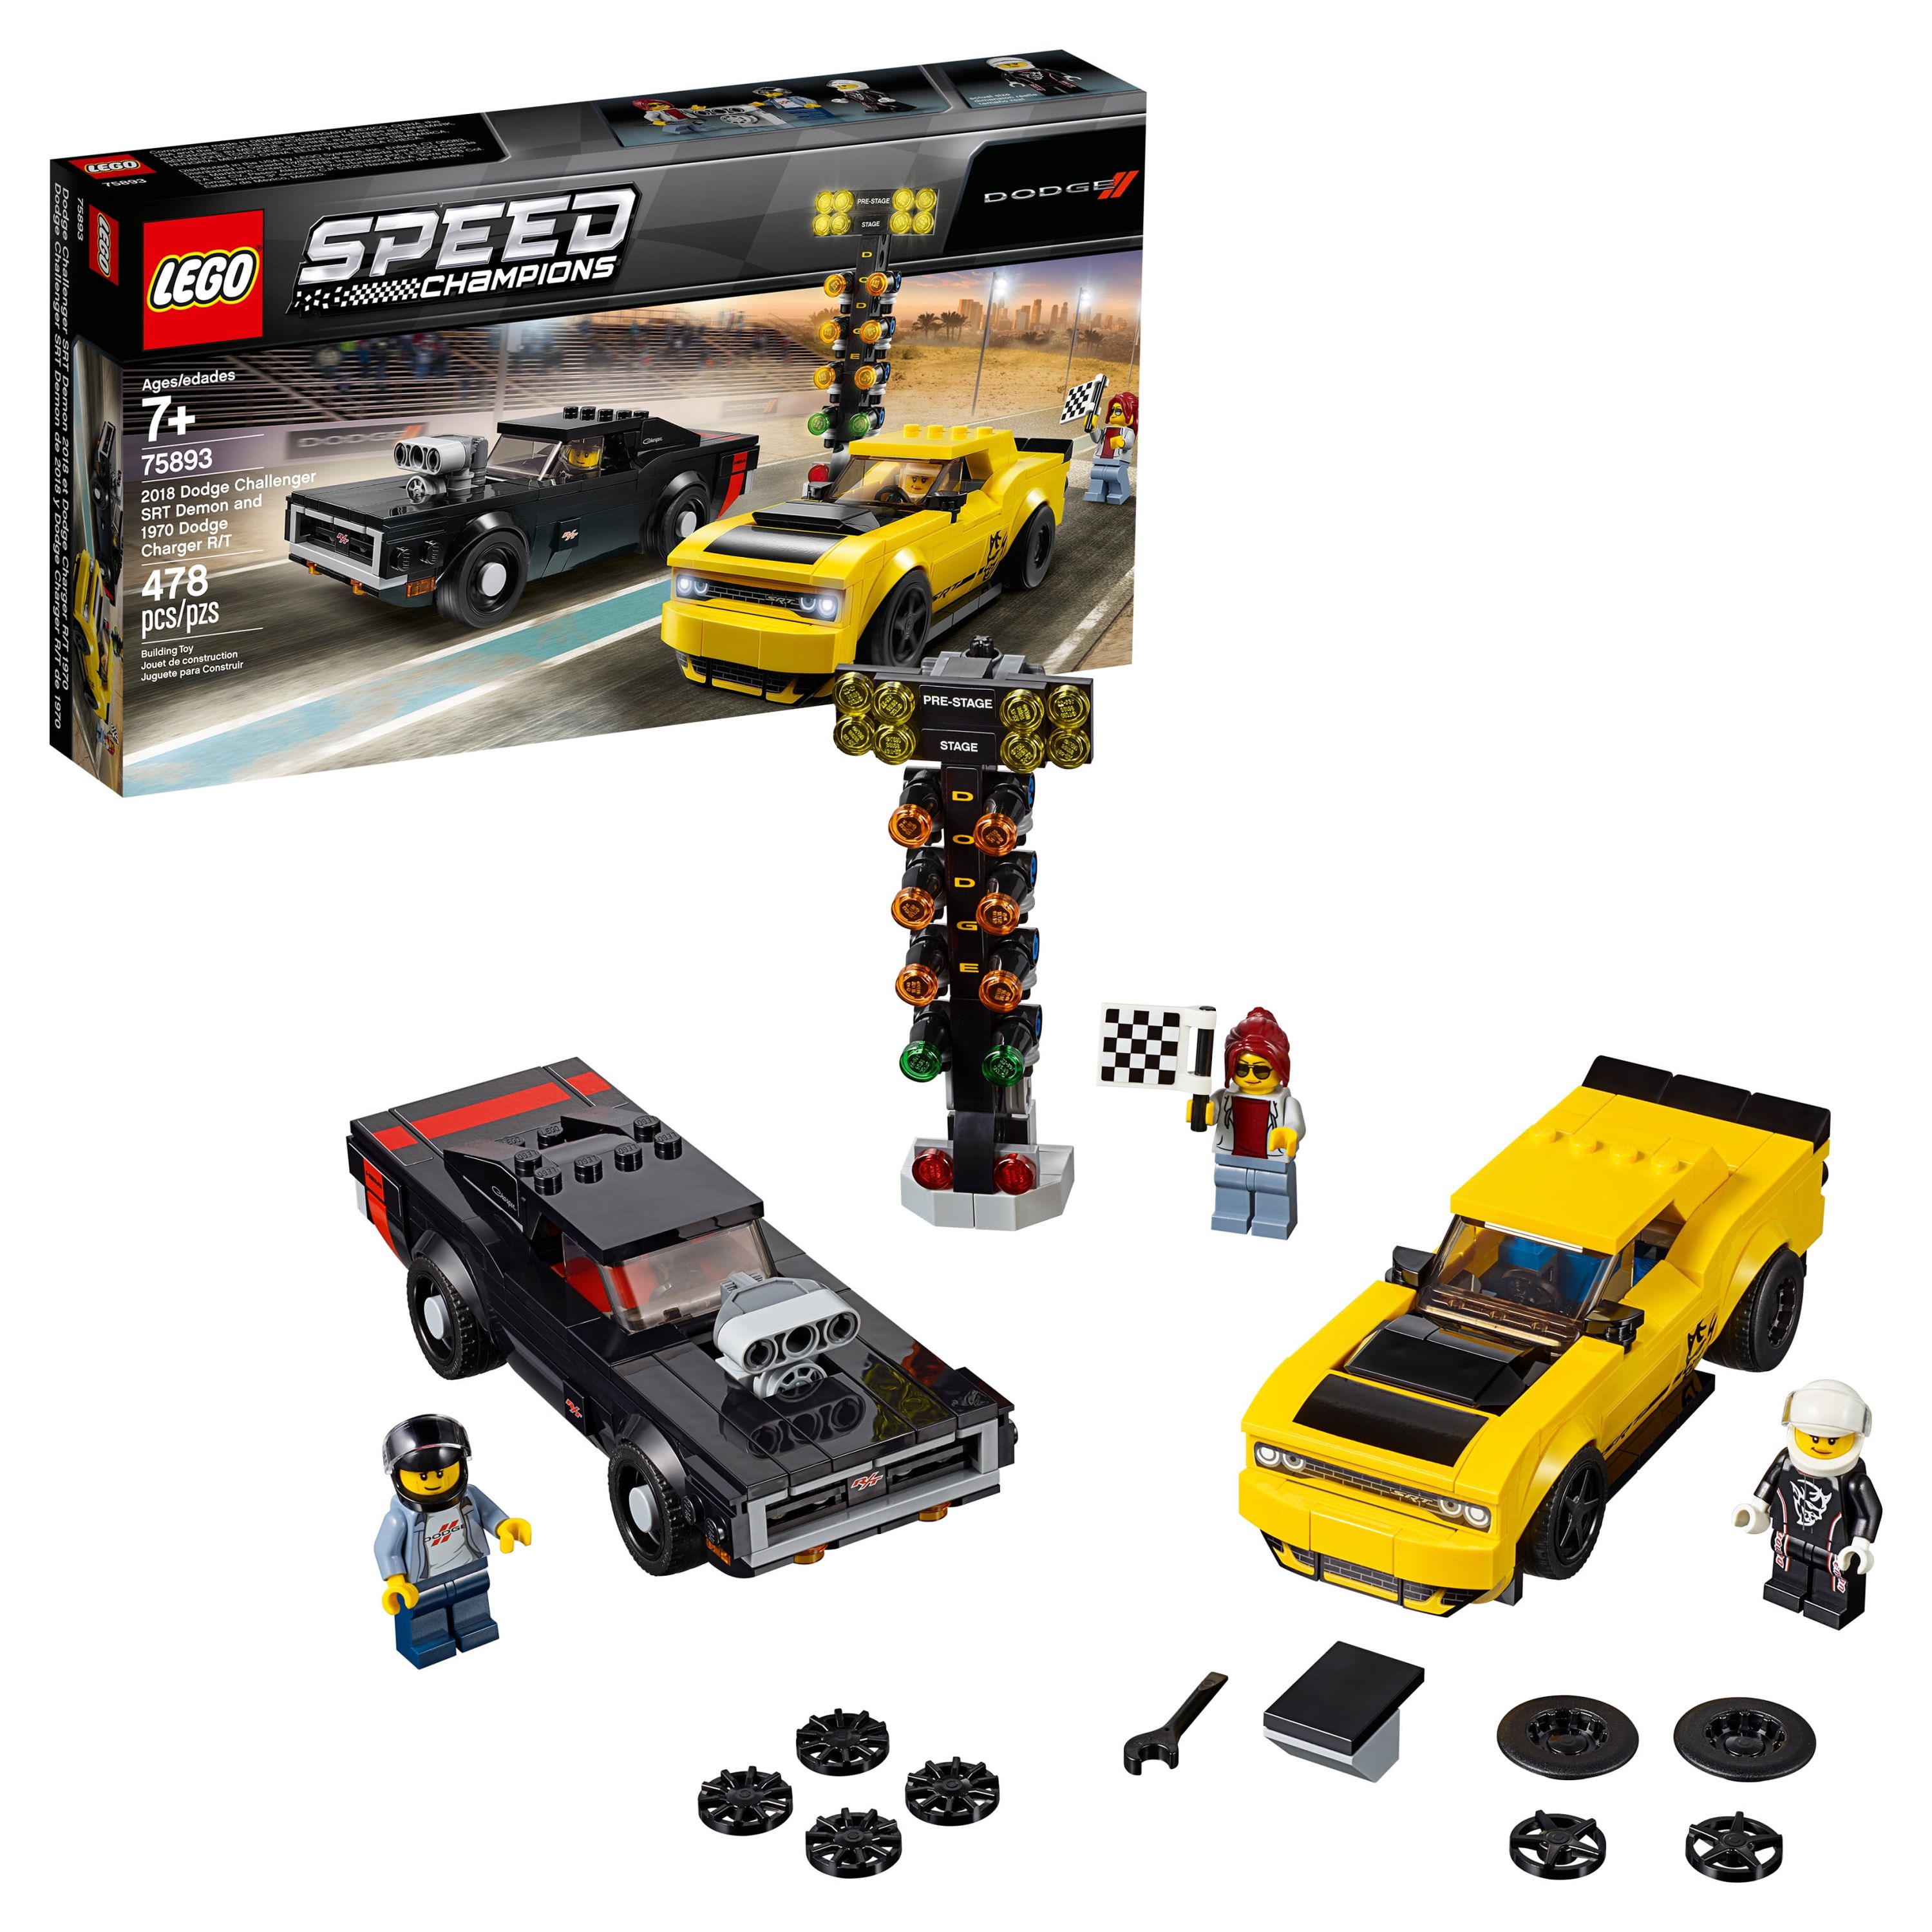 LEGO Speed Champions 2018 Dodge Challenger SRT Demon and 1970 75893 Building Car - image 1 of 5